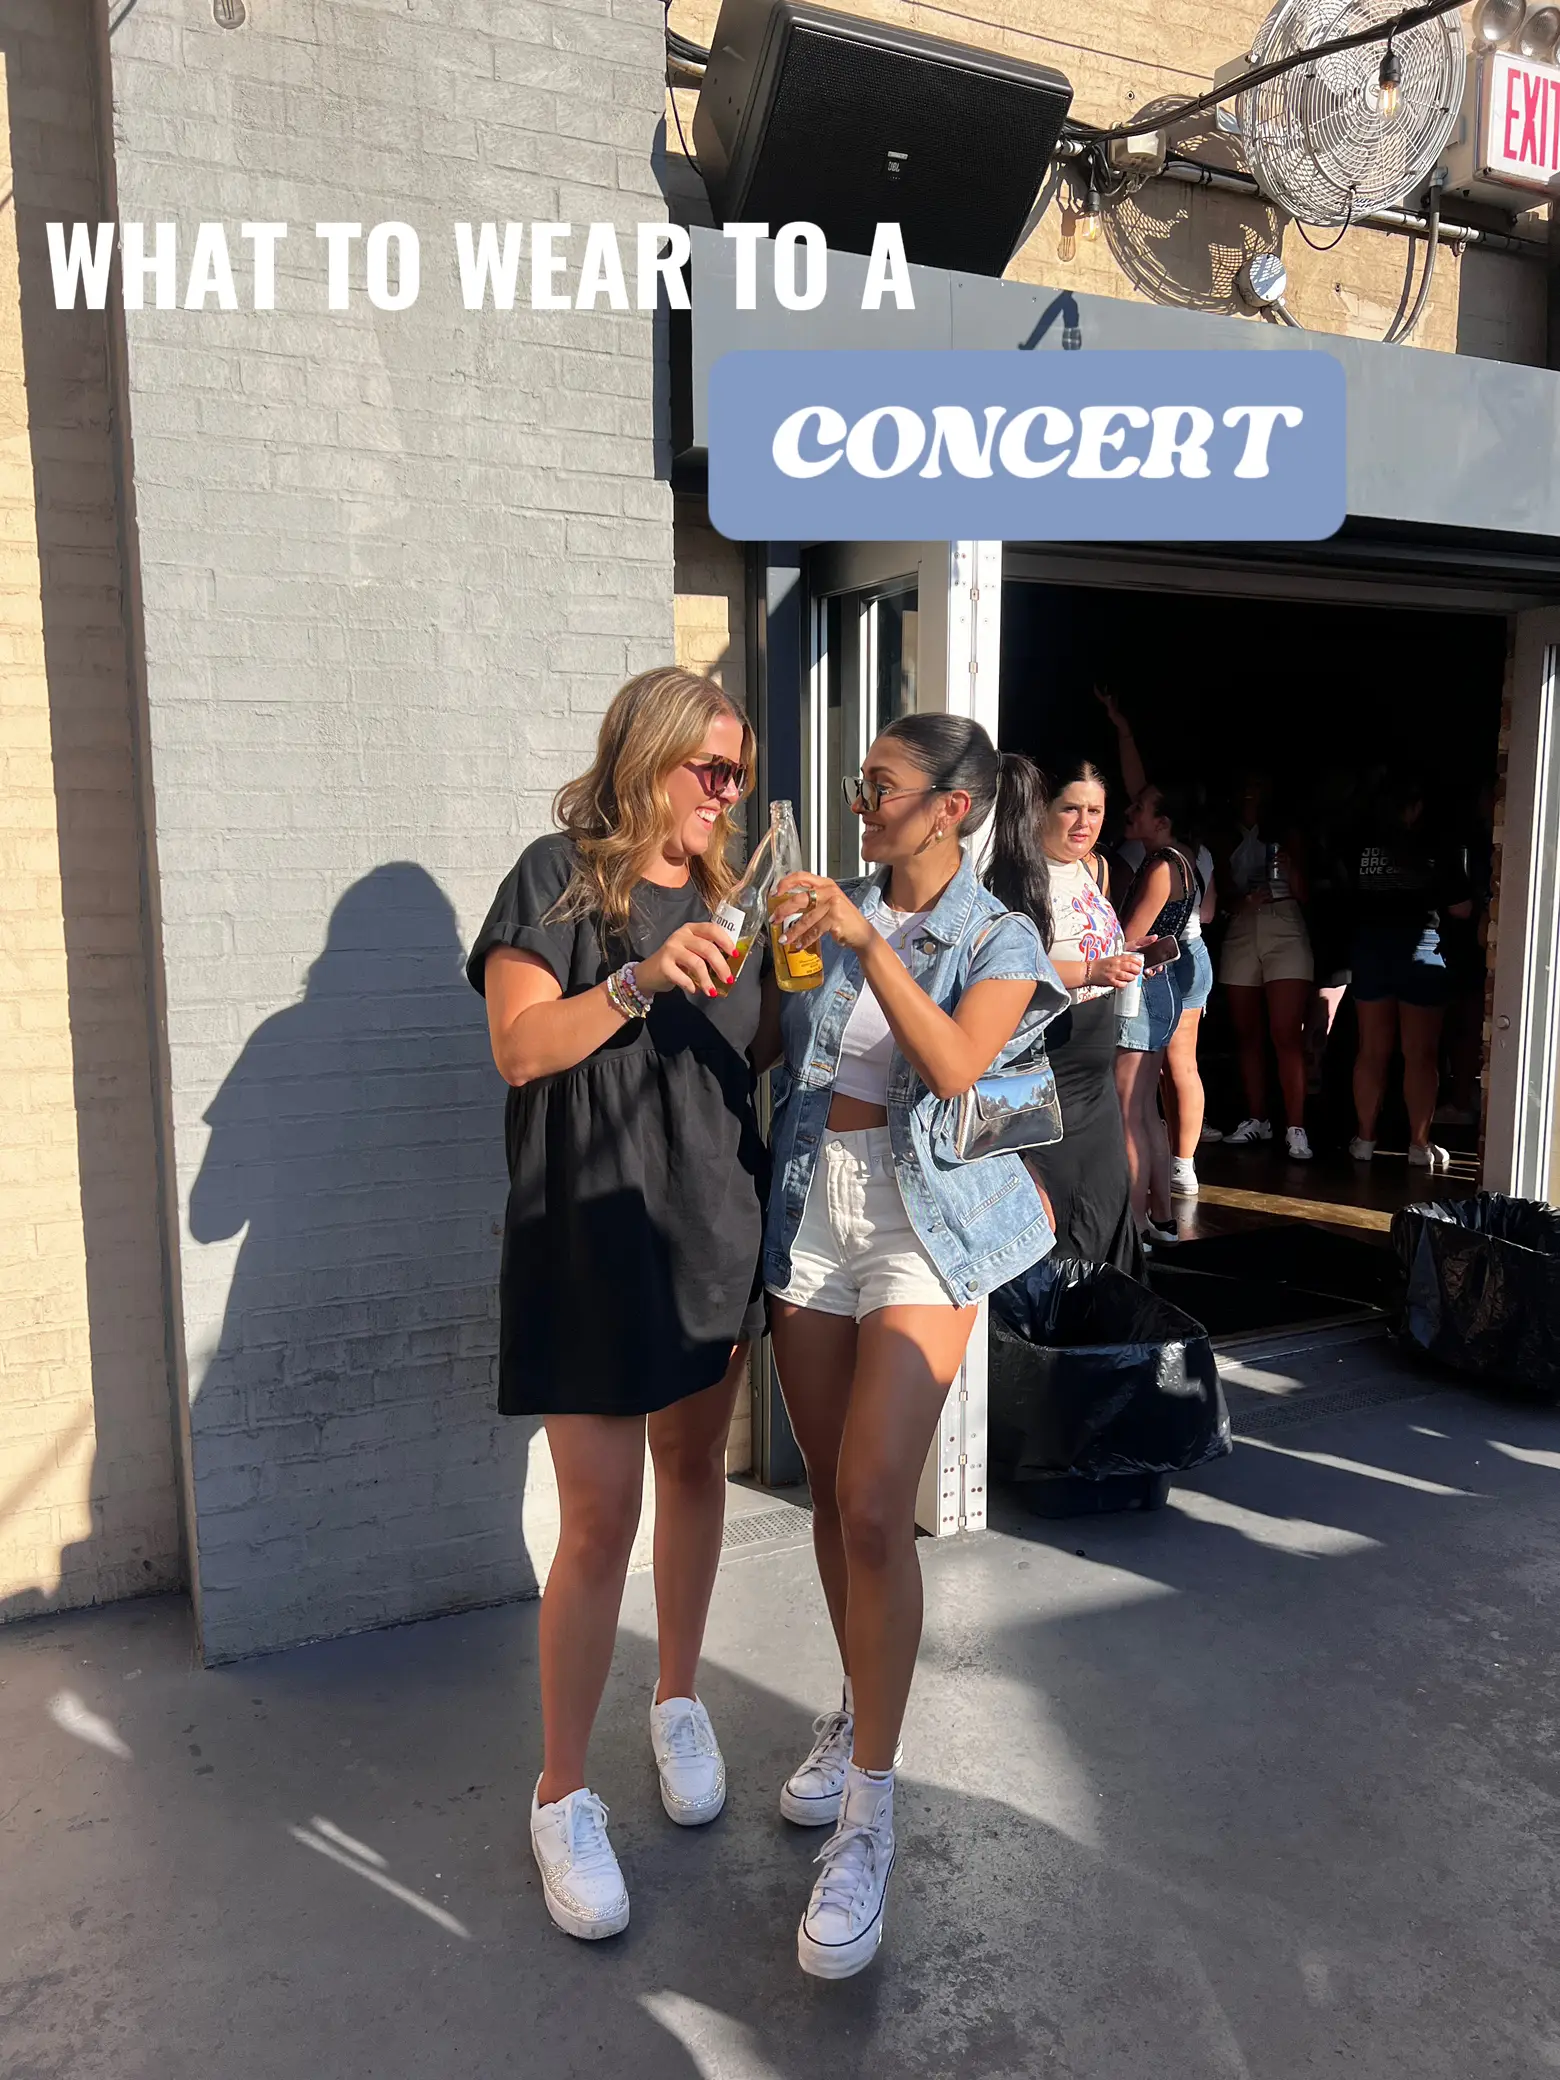  Two women are standing outside a building, wearing shirts and jeans. They are holding drinks in their hands, and there is a backpack nearby. The words "What to Wear to a Concert"